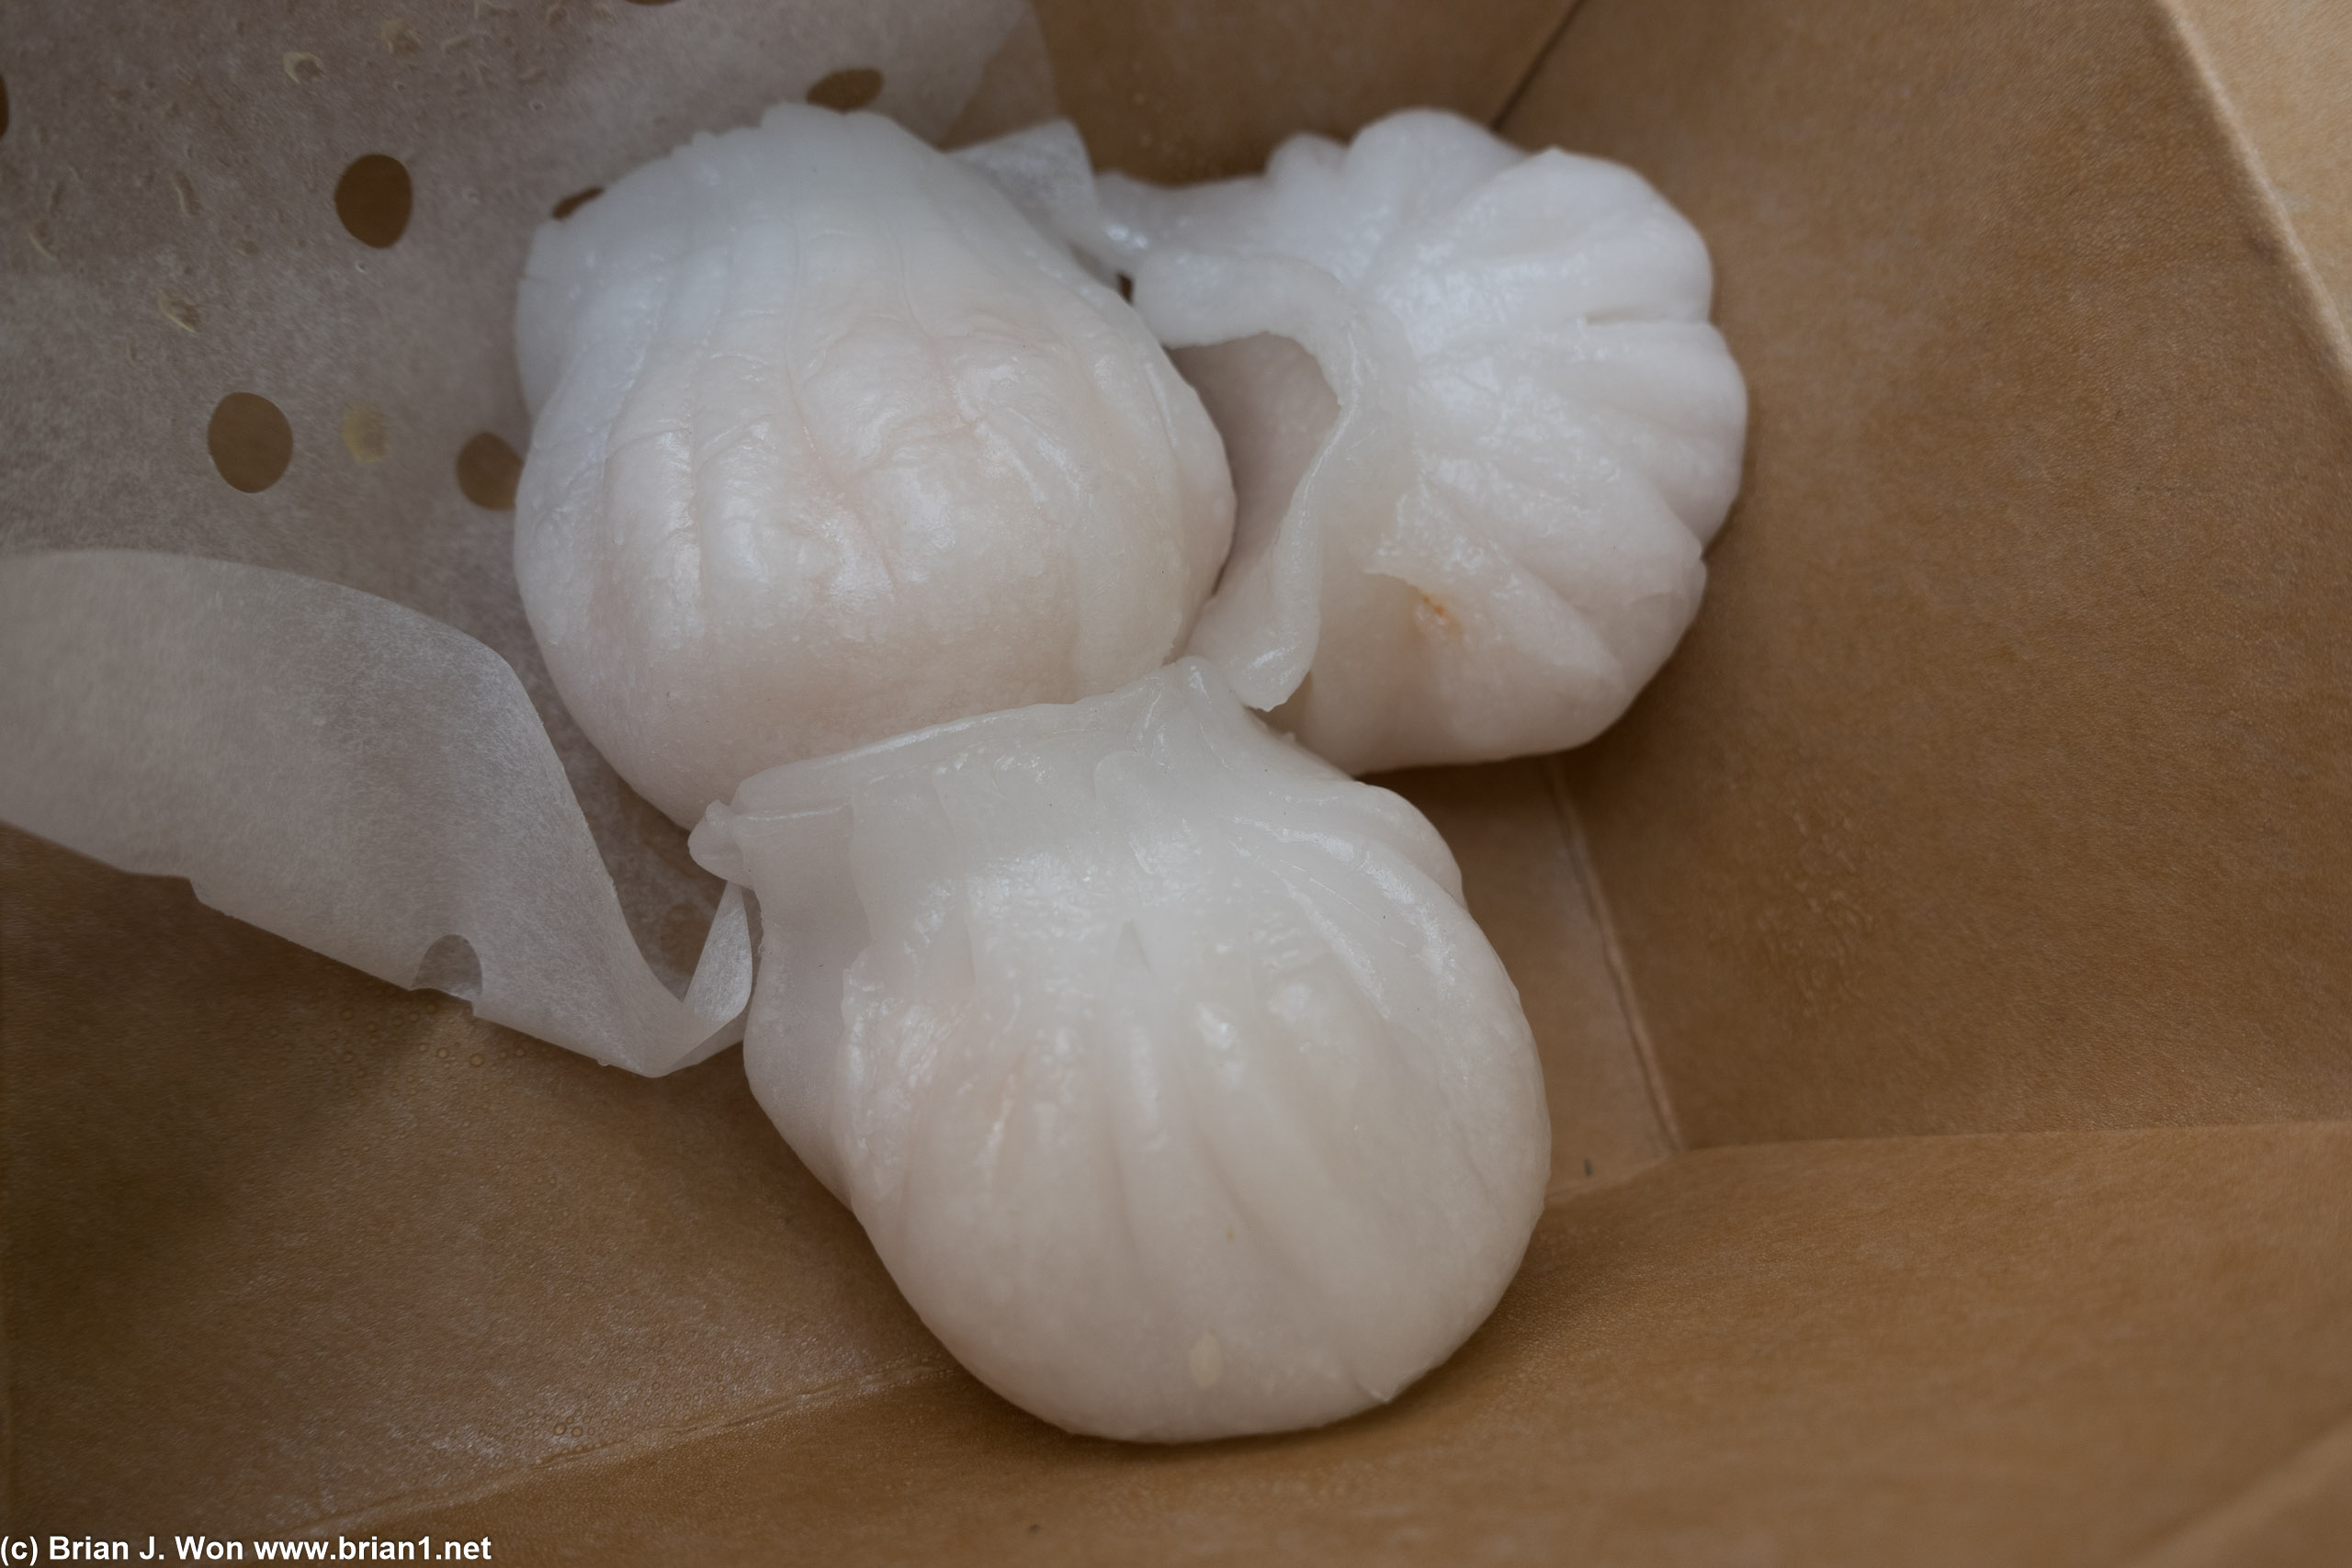 Har gow. Skins way too thick, flavor was acceptable.